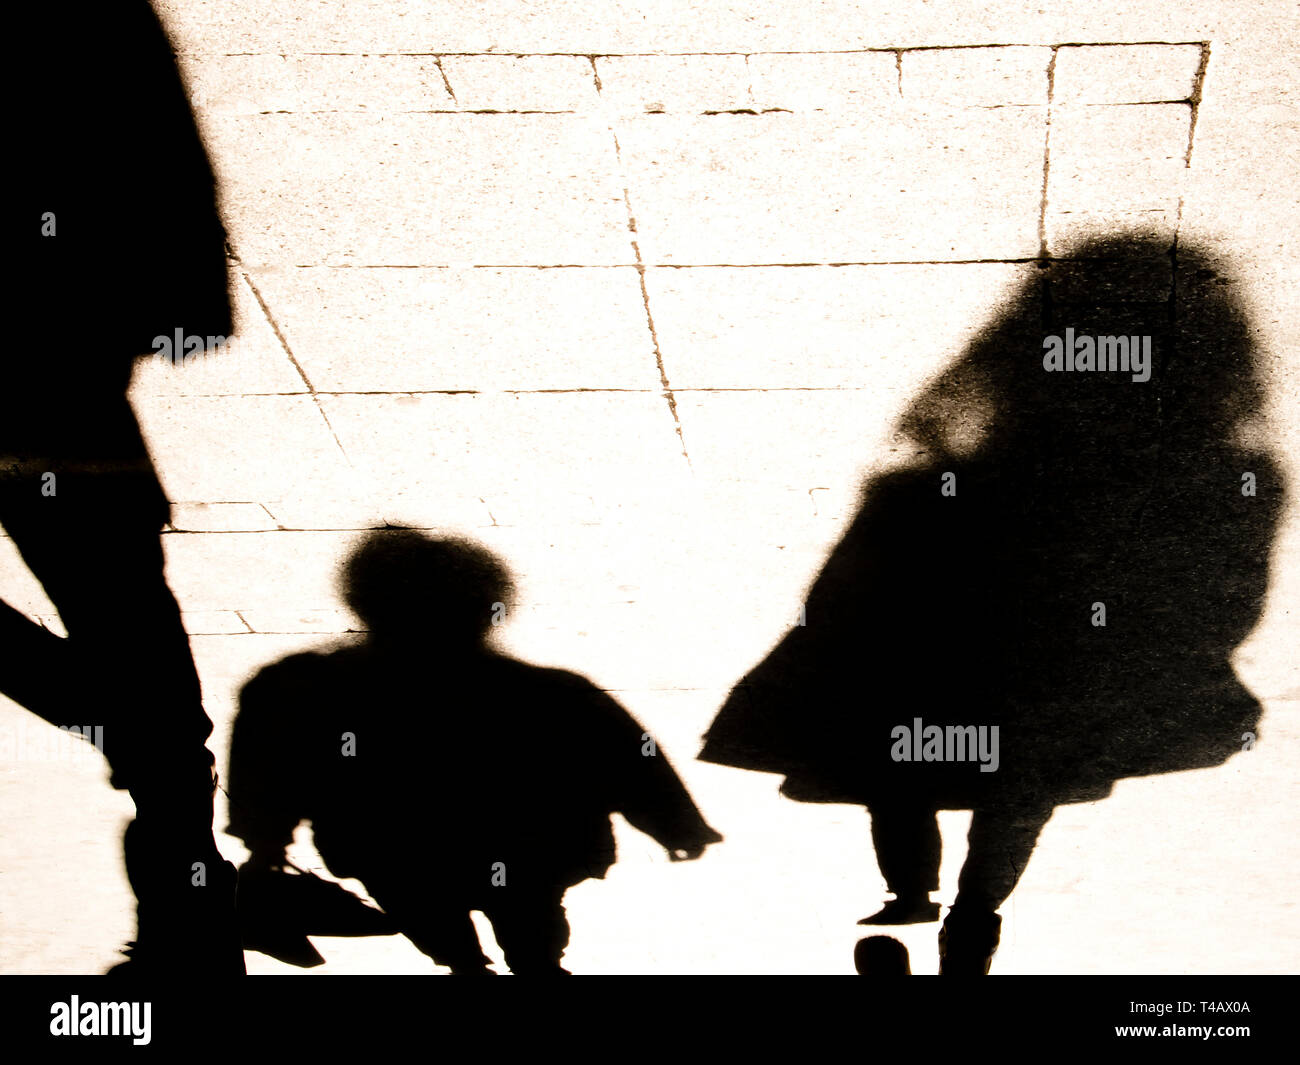 Blurrry shadow silhouete of  people walking in high contrast sepia black and white Stock Photo